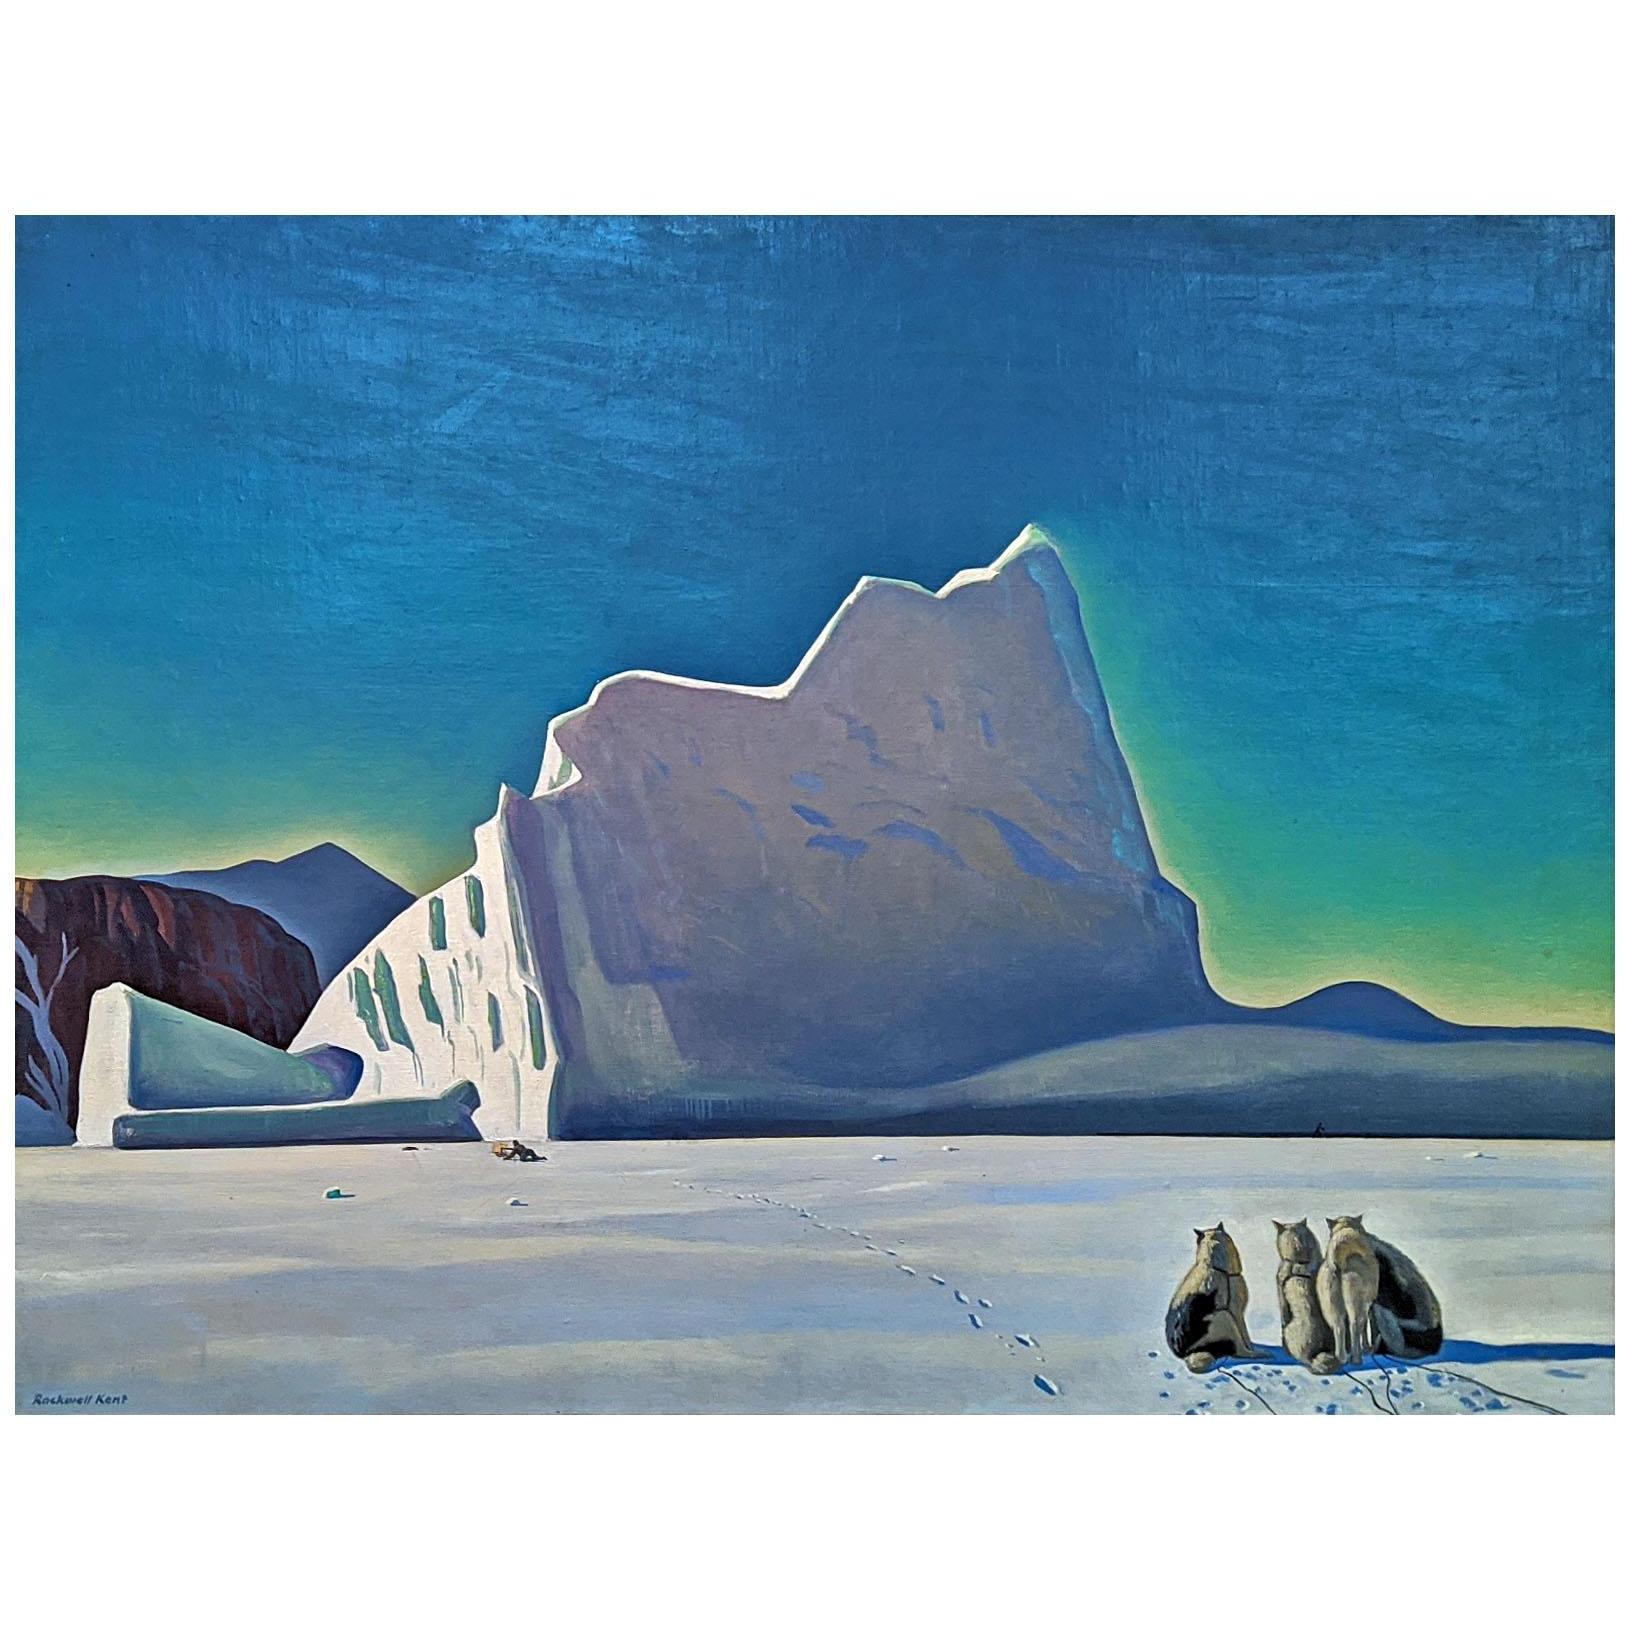 Rockwell Kent. Seal Hunter. North Greenland. 1935-1937. Hermitage Museum